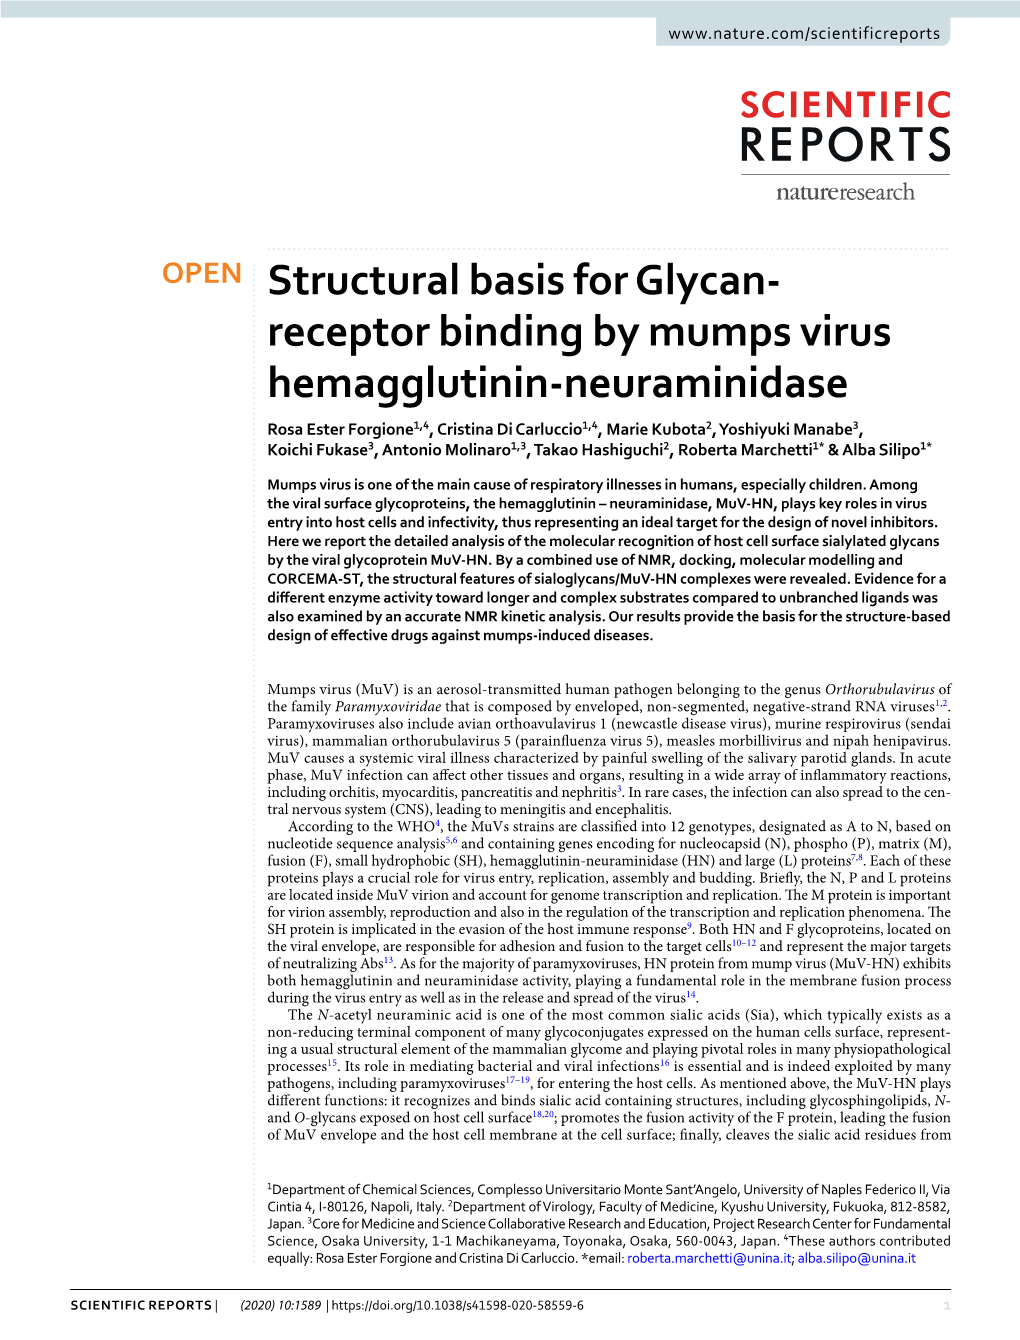 Structural Basis for Glycan-Receptor Binding by Mumps Virus